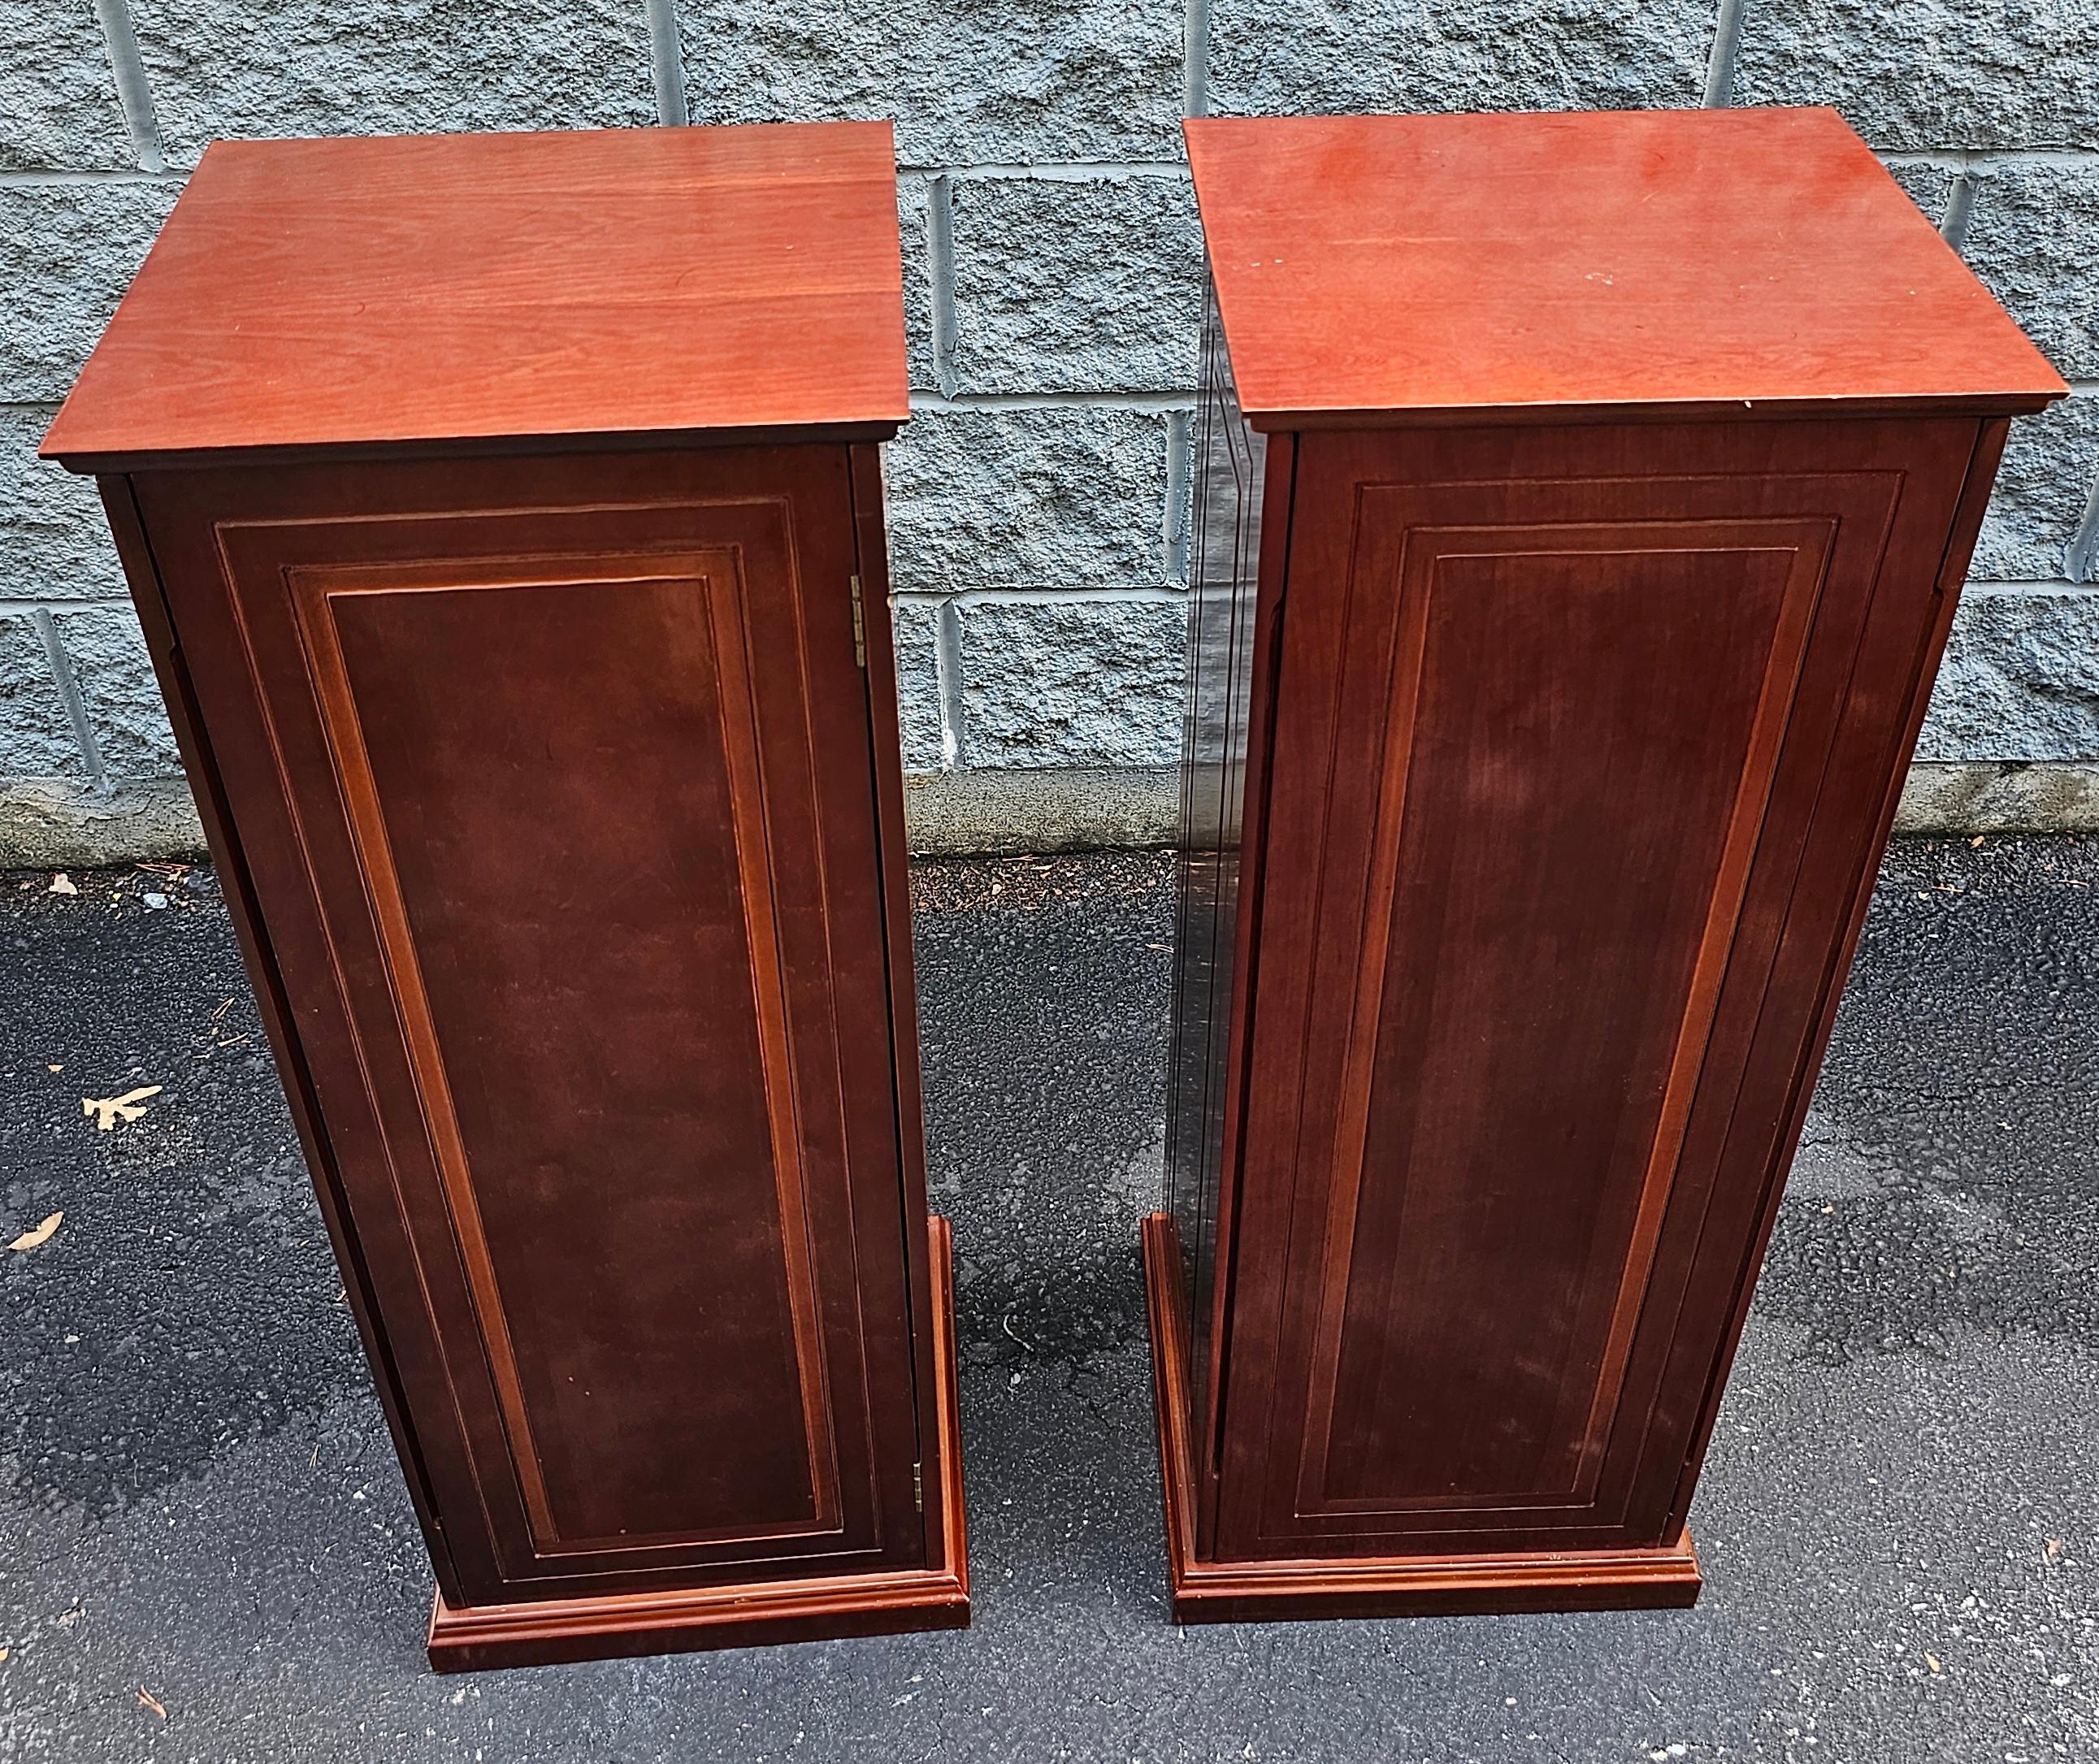 A pair of Late 20th Century Georgian Mahogany Pedestal / Column with double-door Cabinets. Use them for your statue, plant stands and use store CDs, DVDs etc...
Finished on all sides. Measure 37.1/4